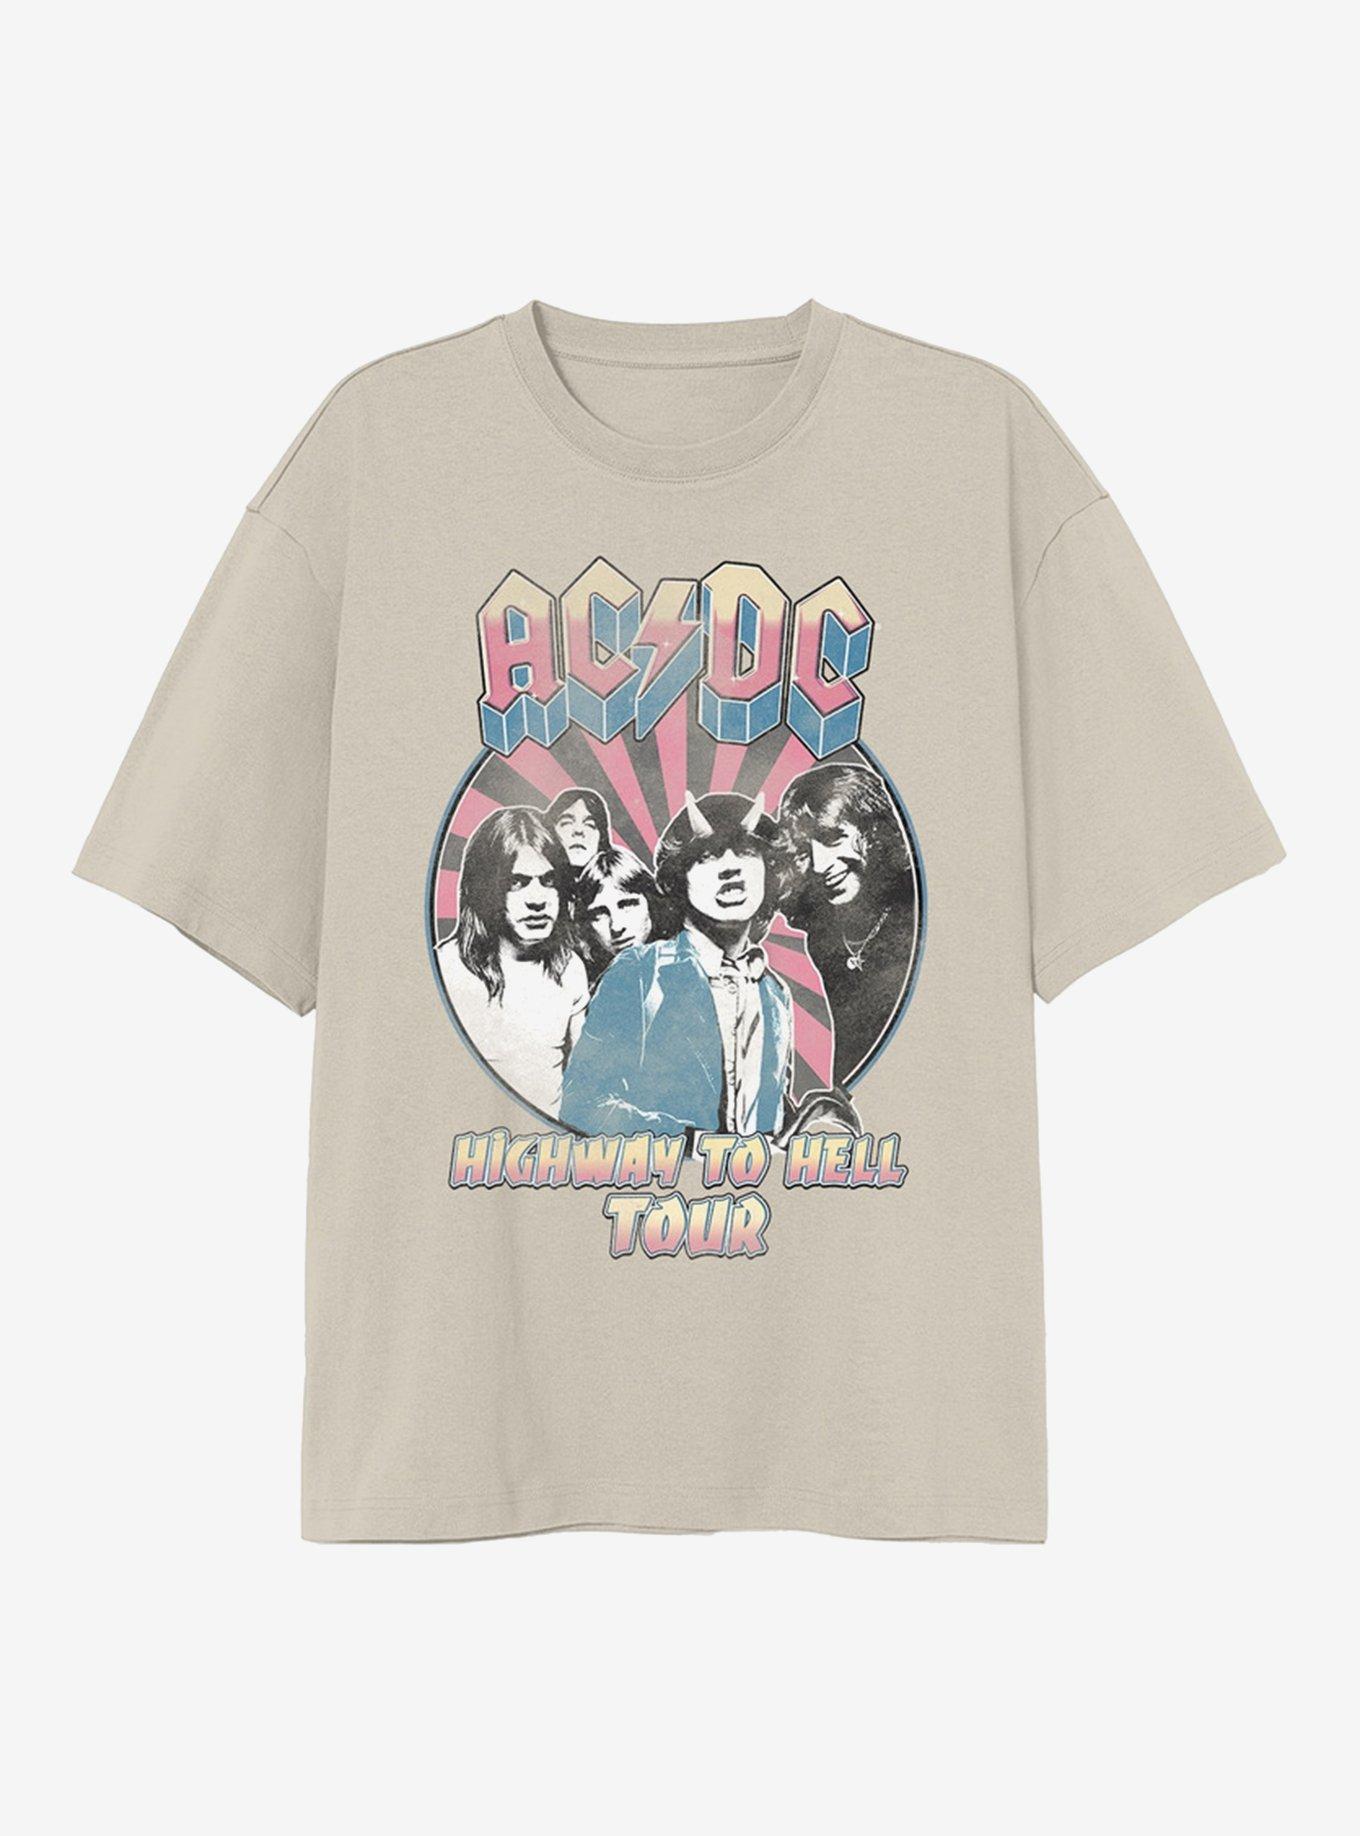 AC/DC Highway To Hell Tour Boyfriend Fit Girls T-Shirt, SAND, hi-res